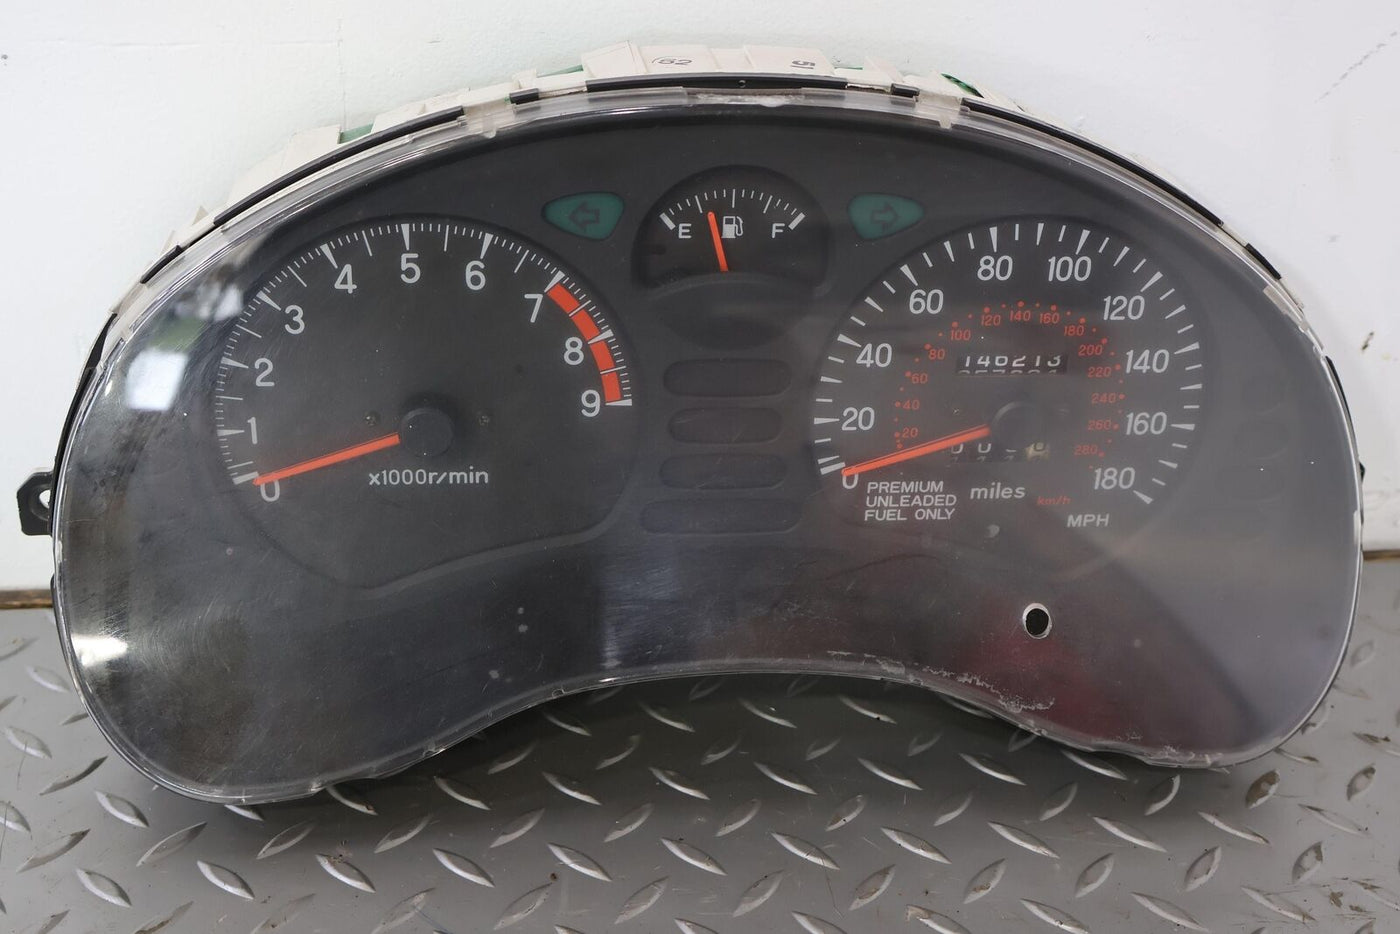 91-92 Mitsubishi 3000GT VR4 AWD 180MPH Speedometer Cluster (Tested 